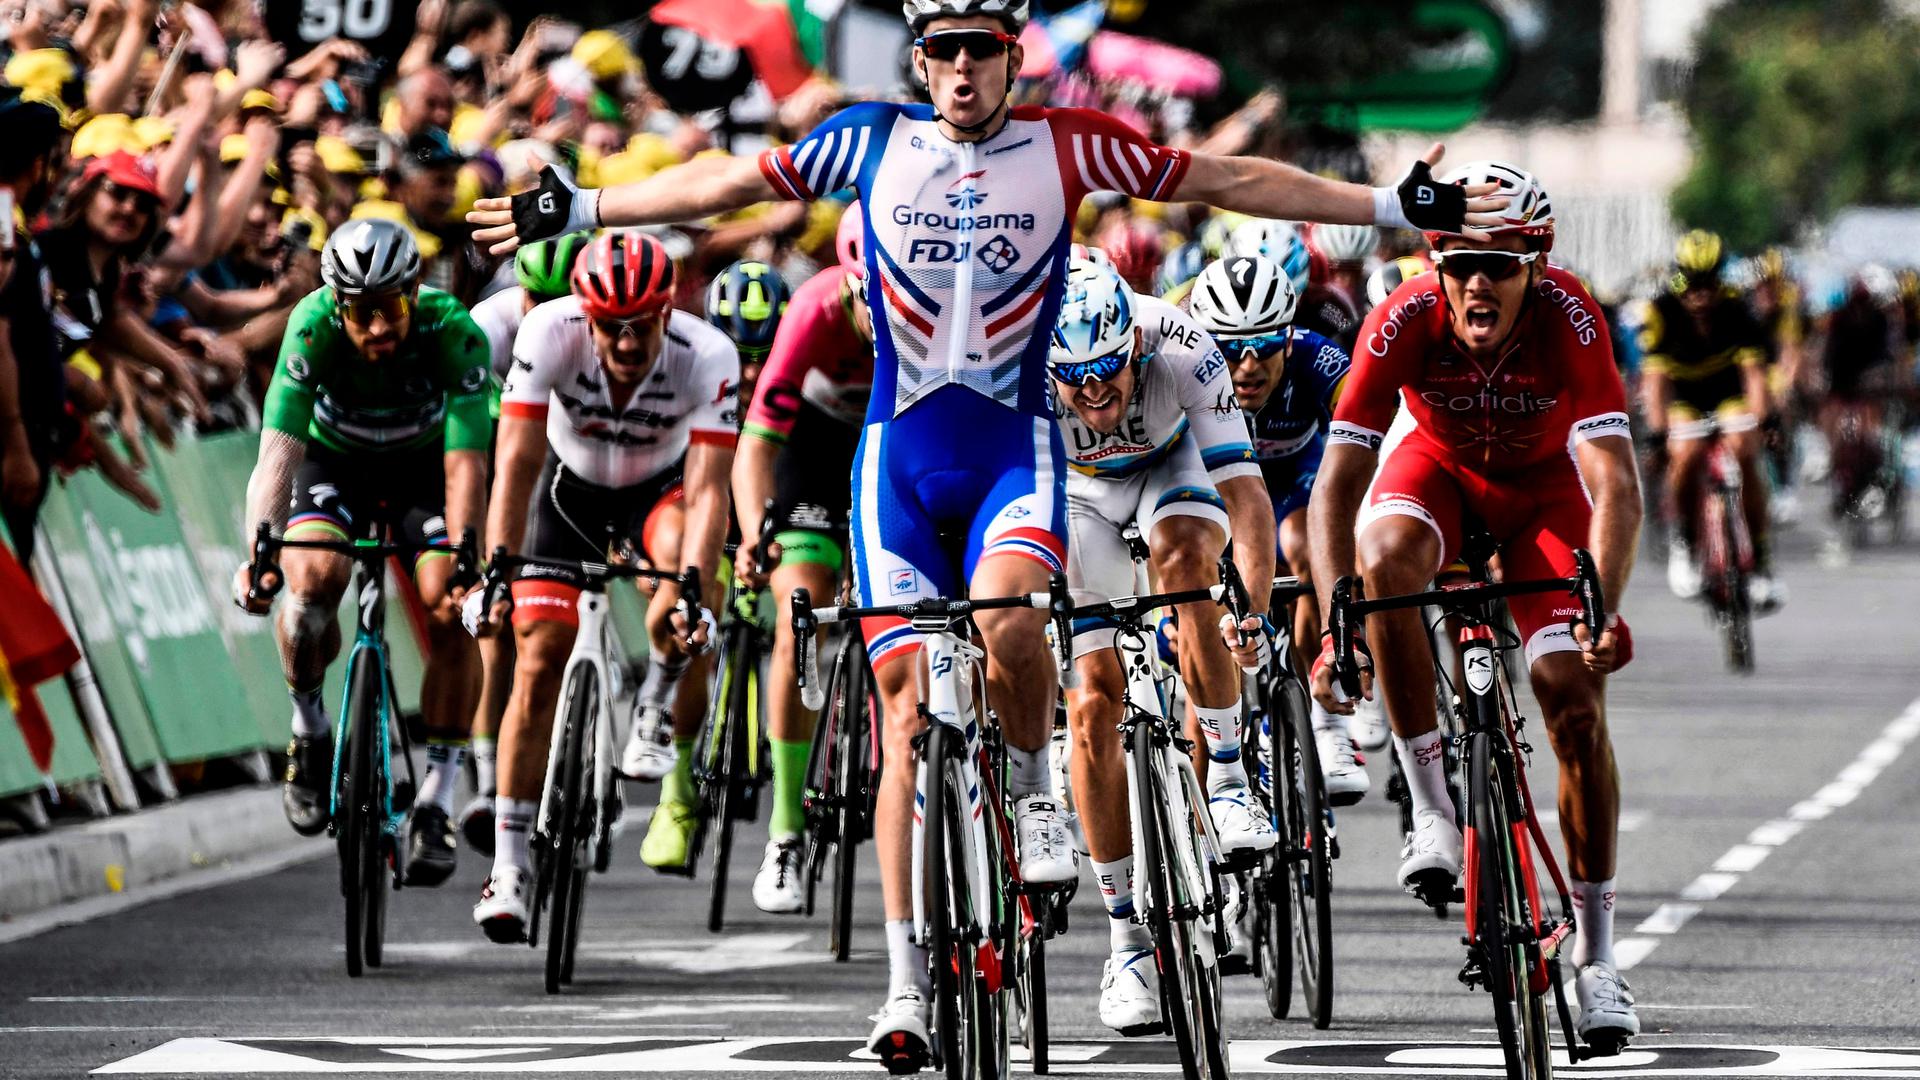 France's Arnaud Demare (C) celebrates as he crosses the finish line to win the 18th stage of the 105th edition of the Tour de France cycling race, on July 26, 2018 between Trie-sur-Baise and Pau, southwestern France. / AFP PHOTO / Philippe LOPEZ